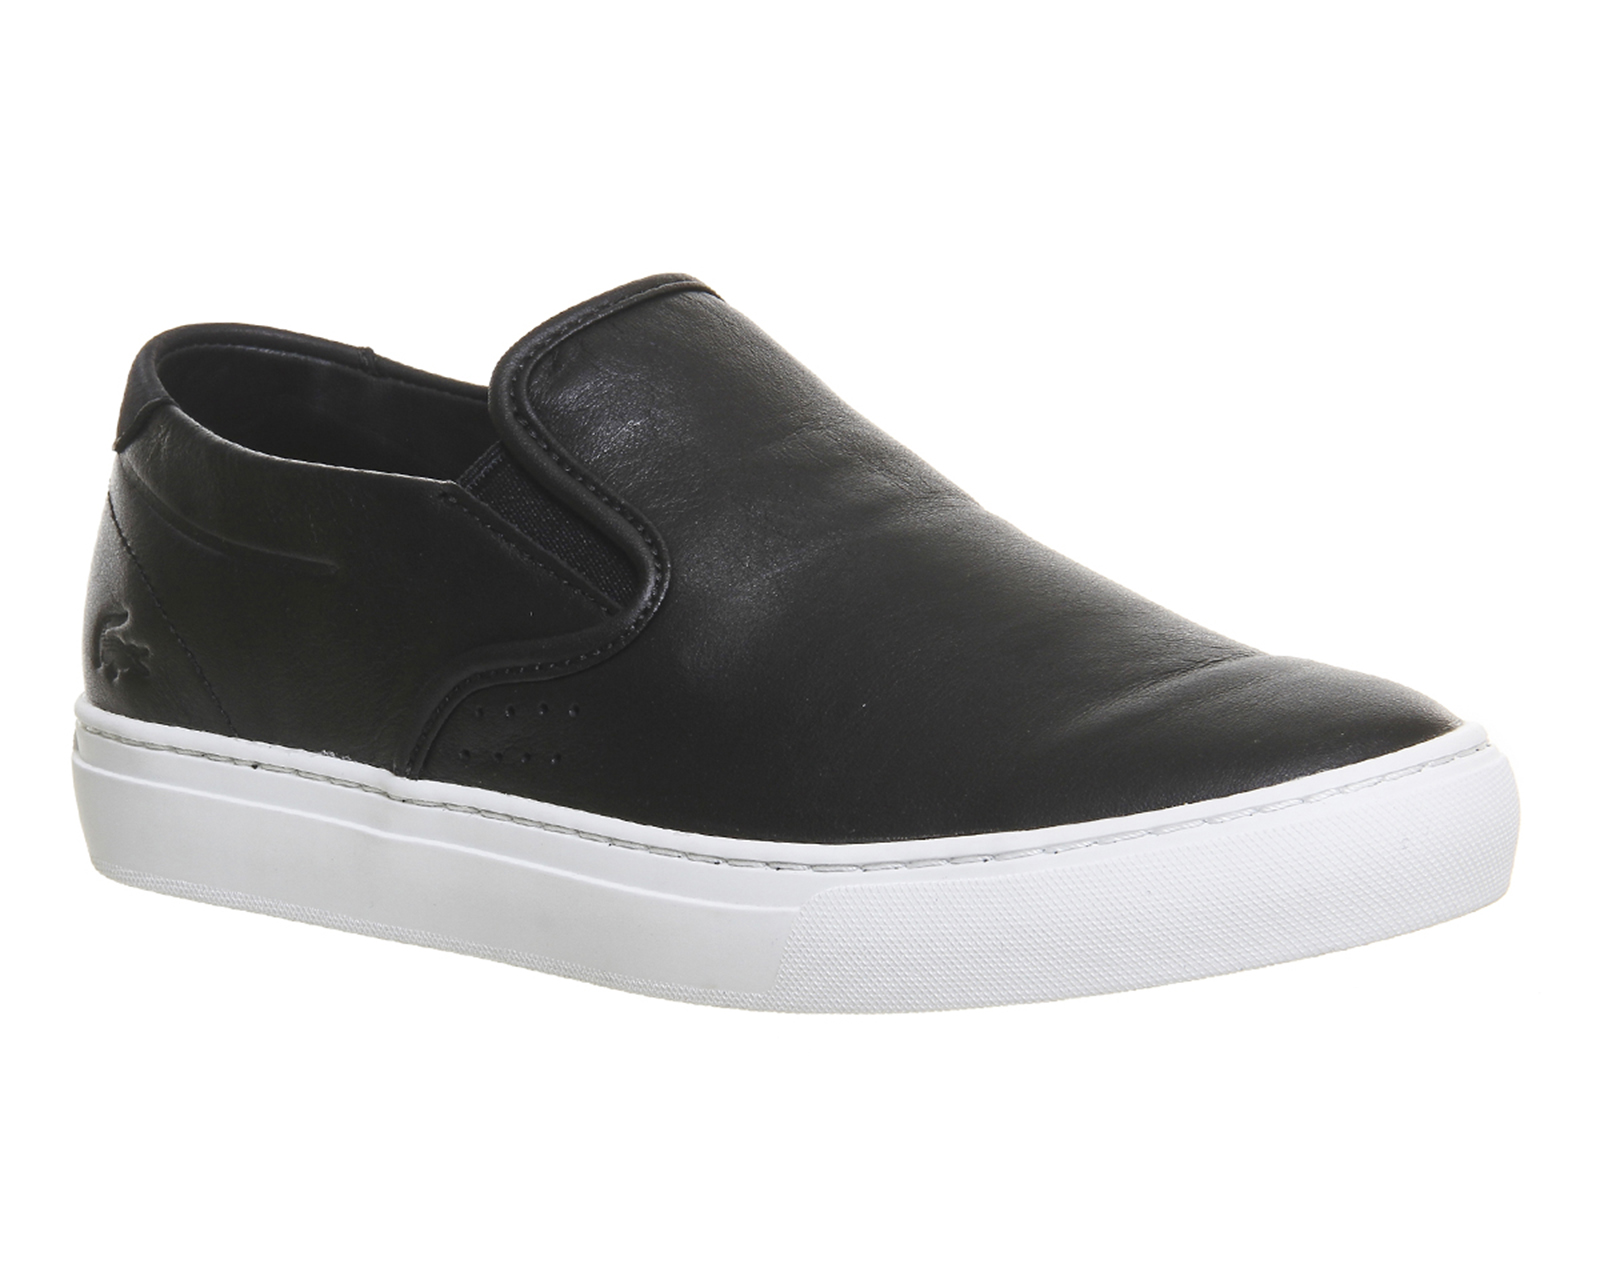 lacoste slip on leather, OFF 74%,Buy!